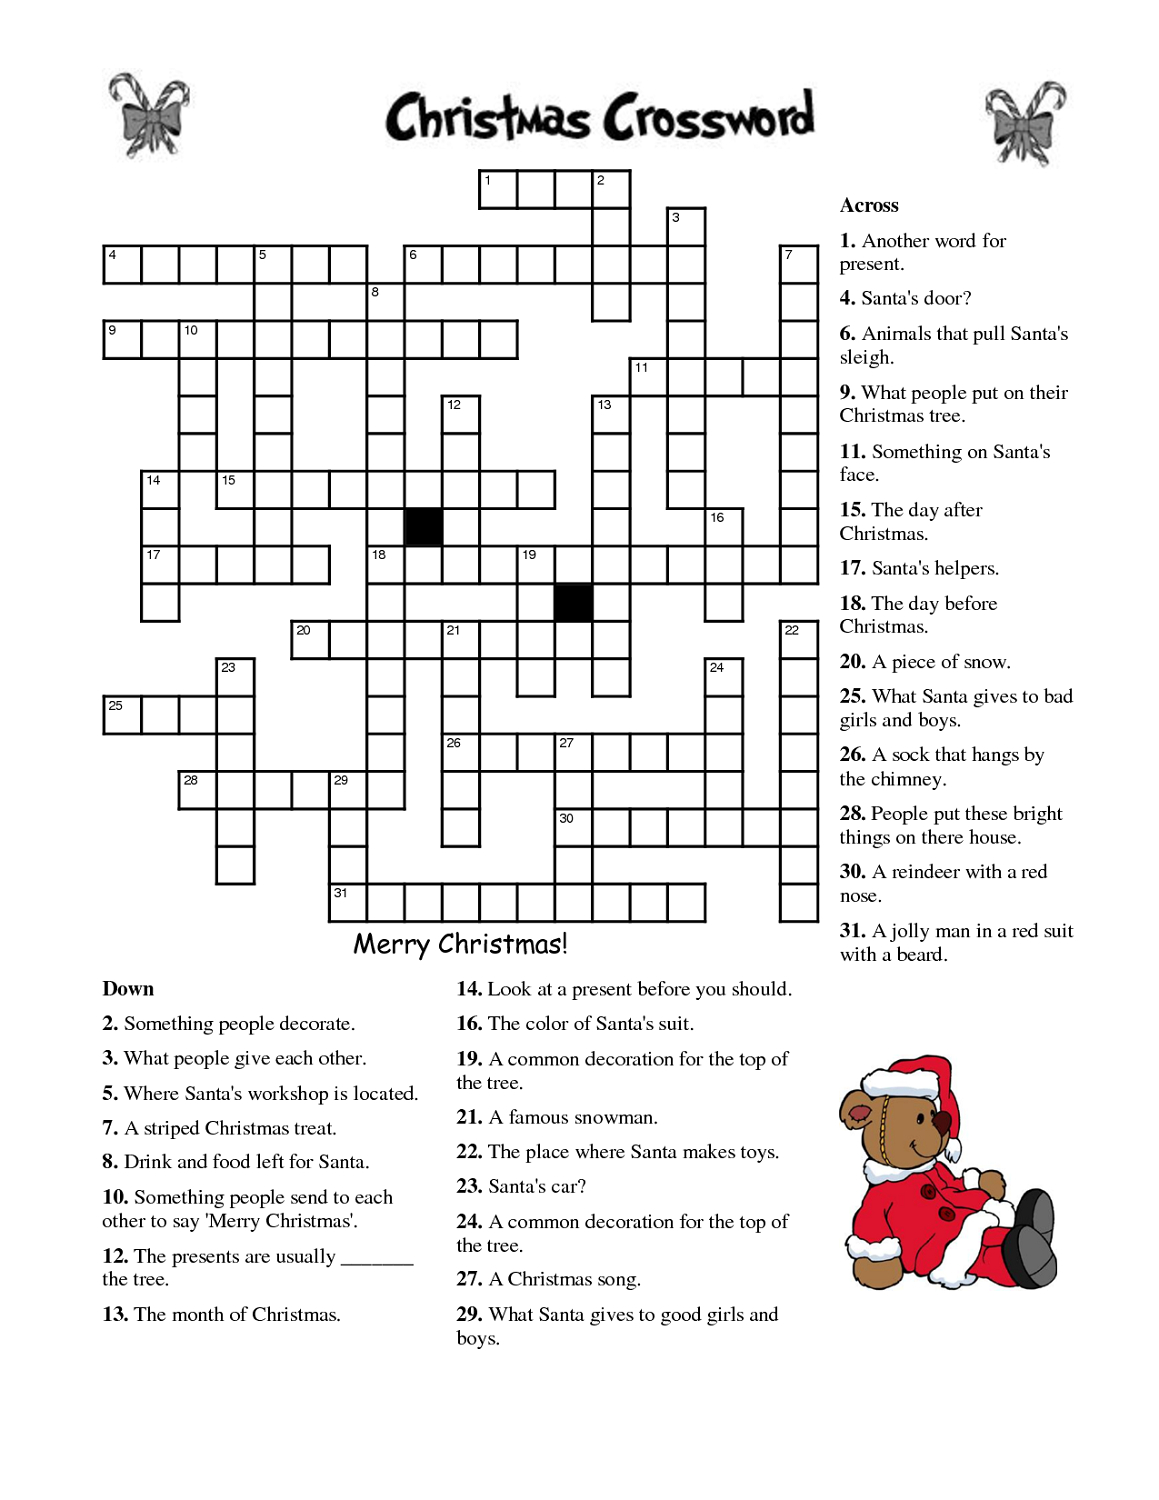 Printable Christmas Songs Crossword Puzzle